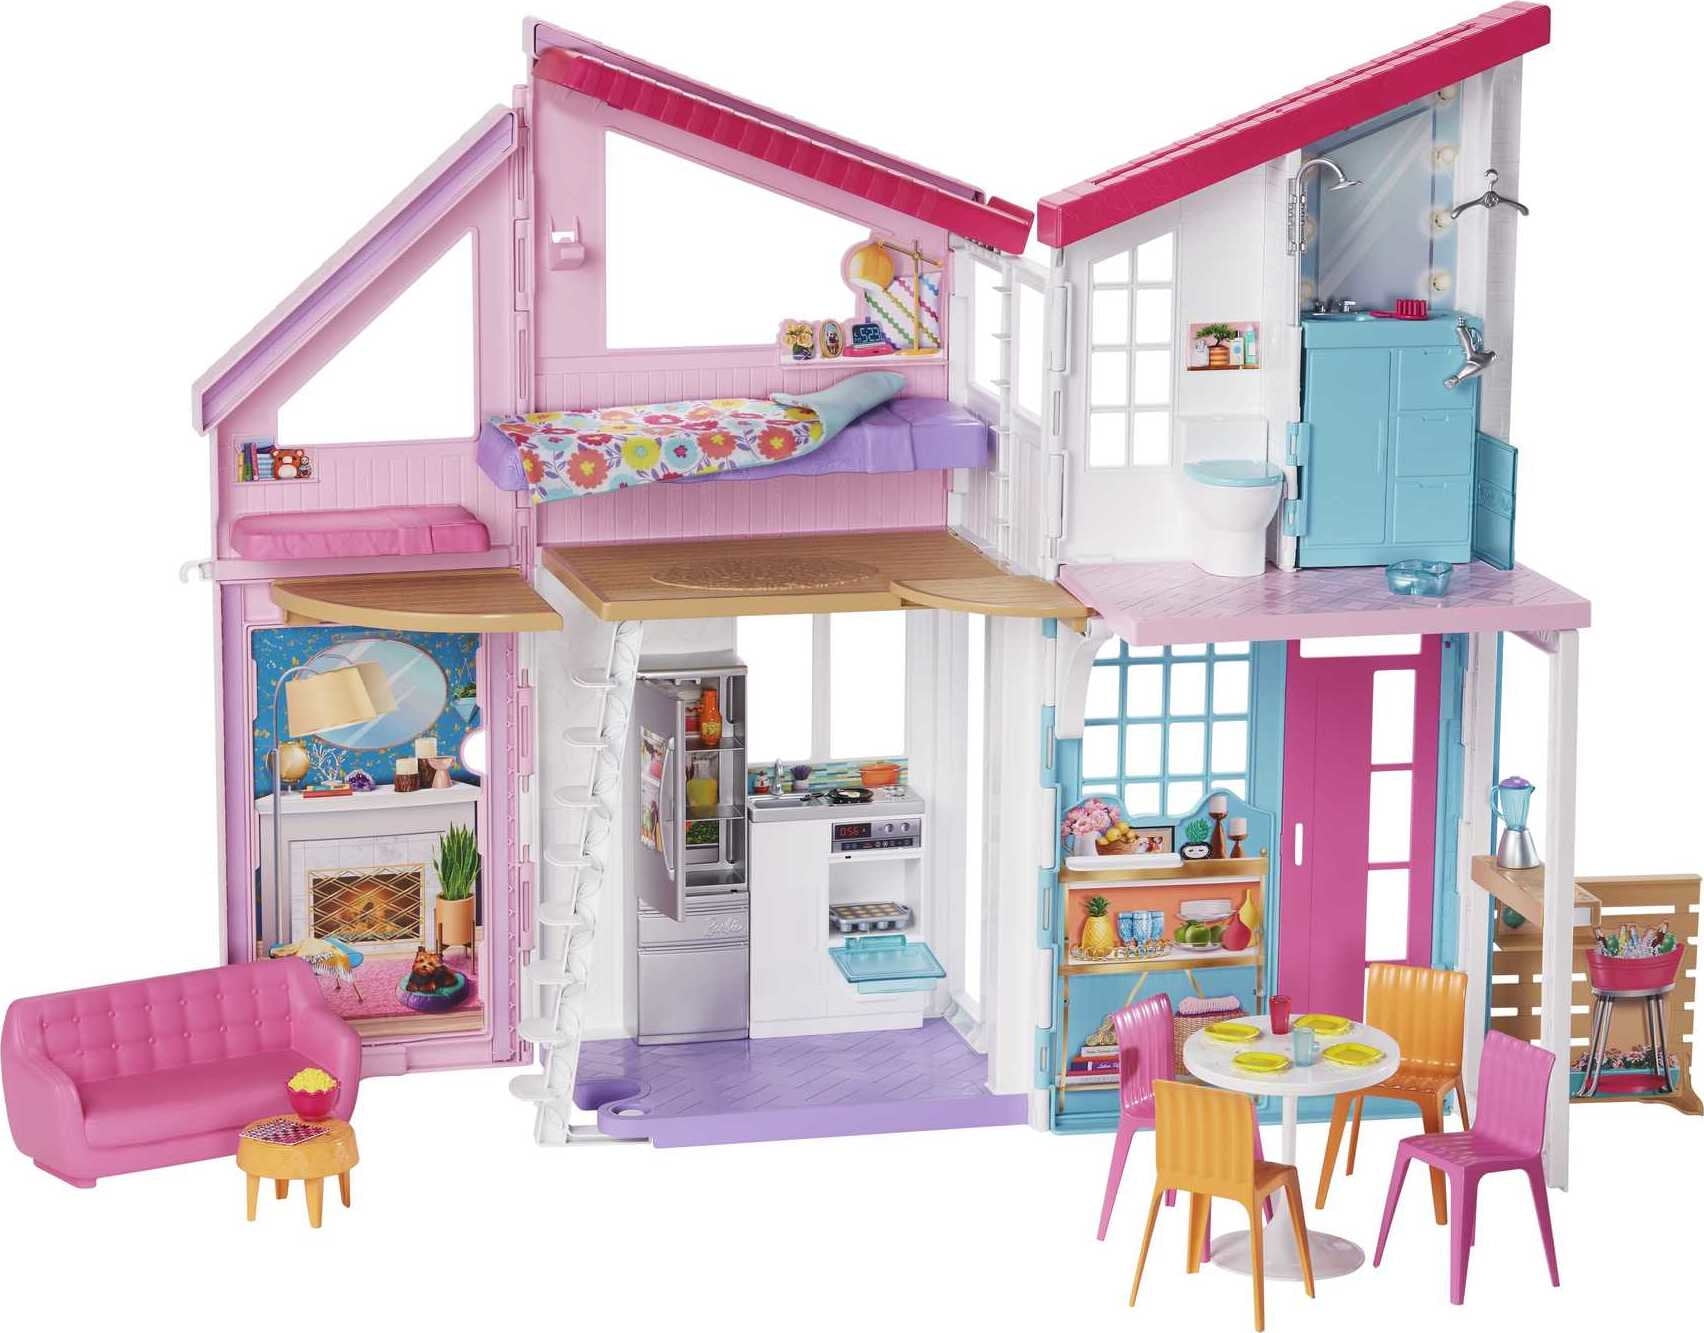 6 Design Lessons From 6 Decades of Barbie Dreamhouses